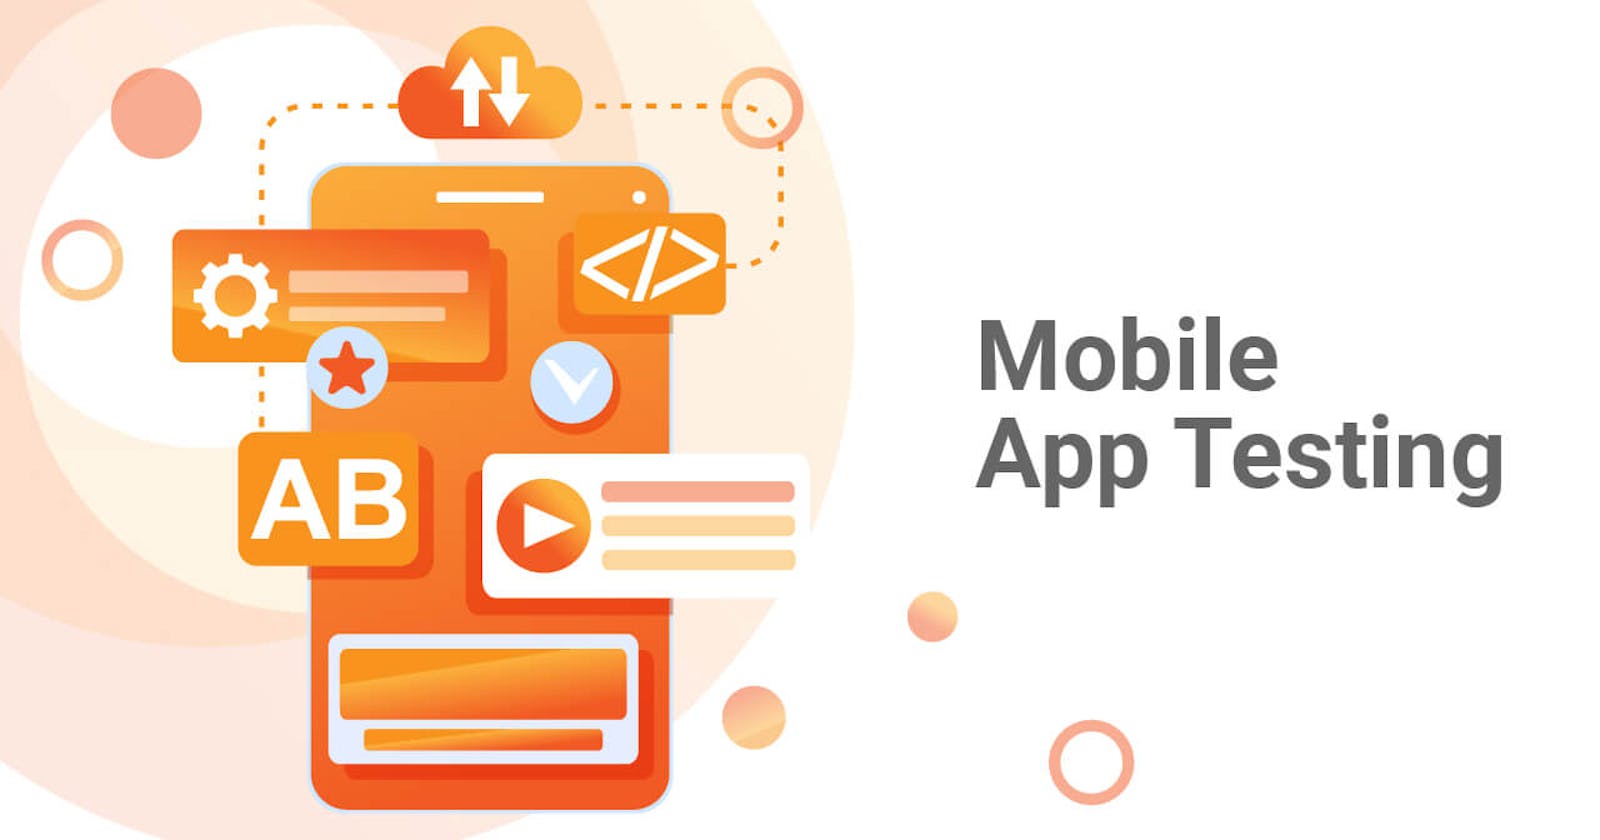 Why Is Mobile App Testing Necessary?